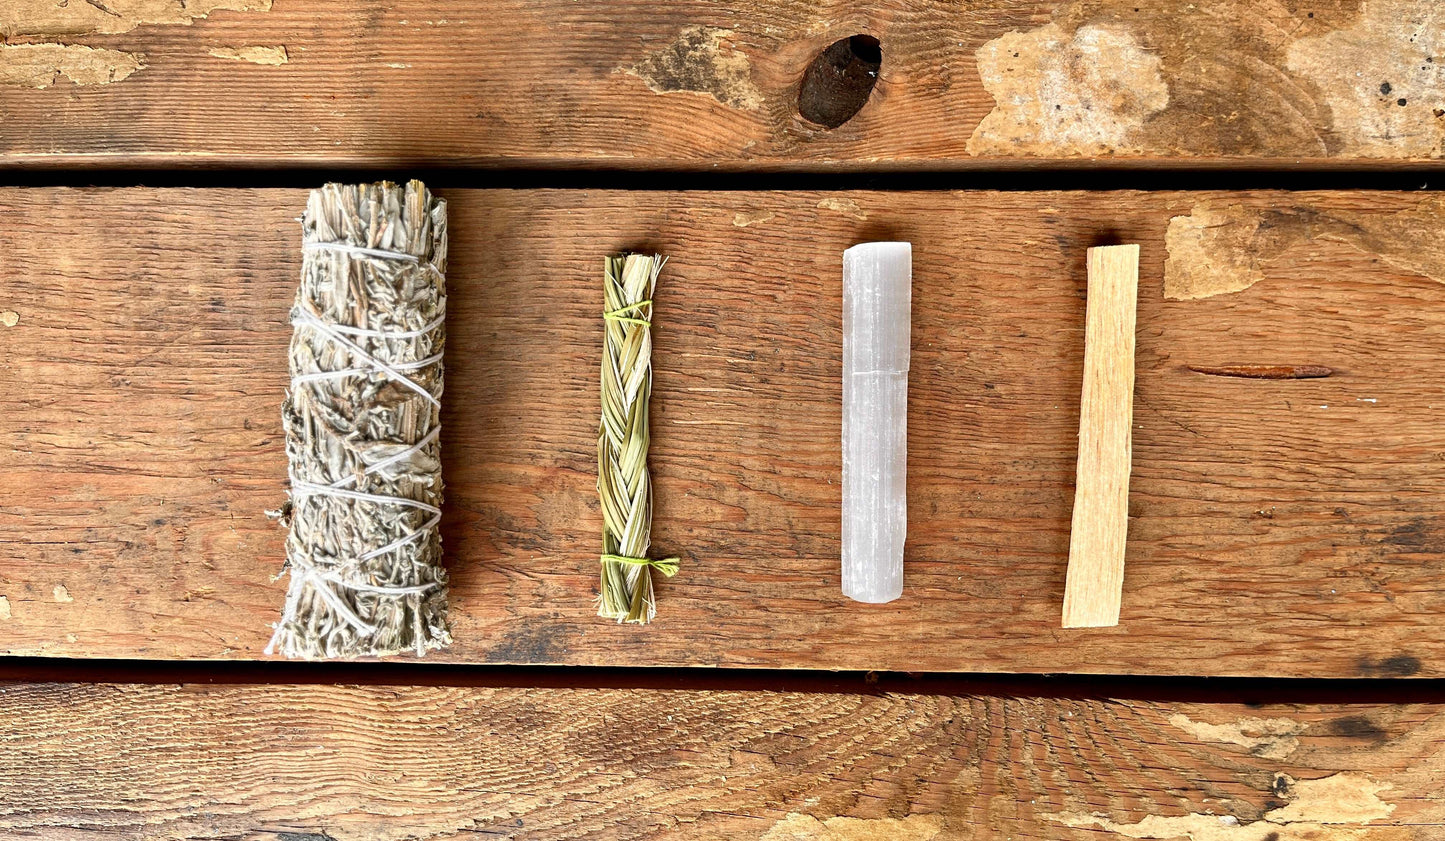 Sacred Ritual Bundle - Ritual Smoke, Featuring Blue Sage, Sweetgrass Braid, Palo Santo, and Selenite Stick. Benefits include Purification, Clearing Energy, and Enhancing Rituals and Ceremonies.